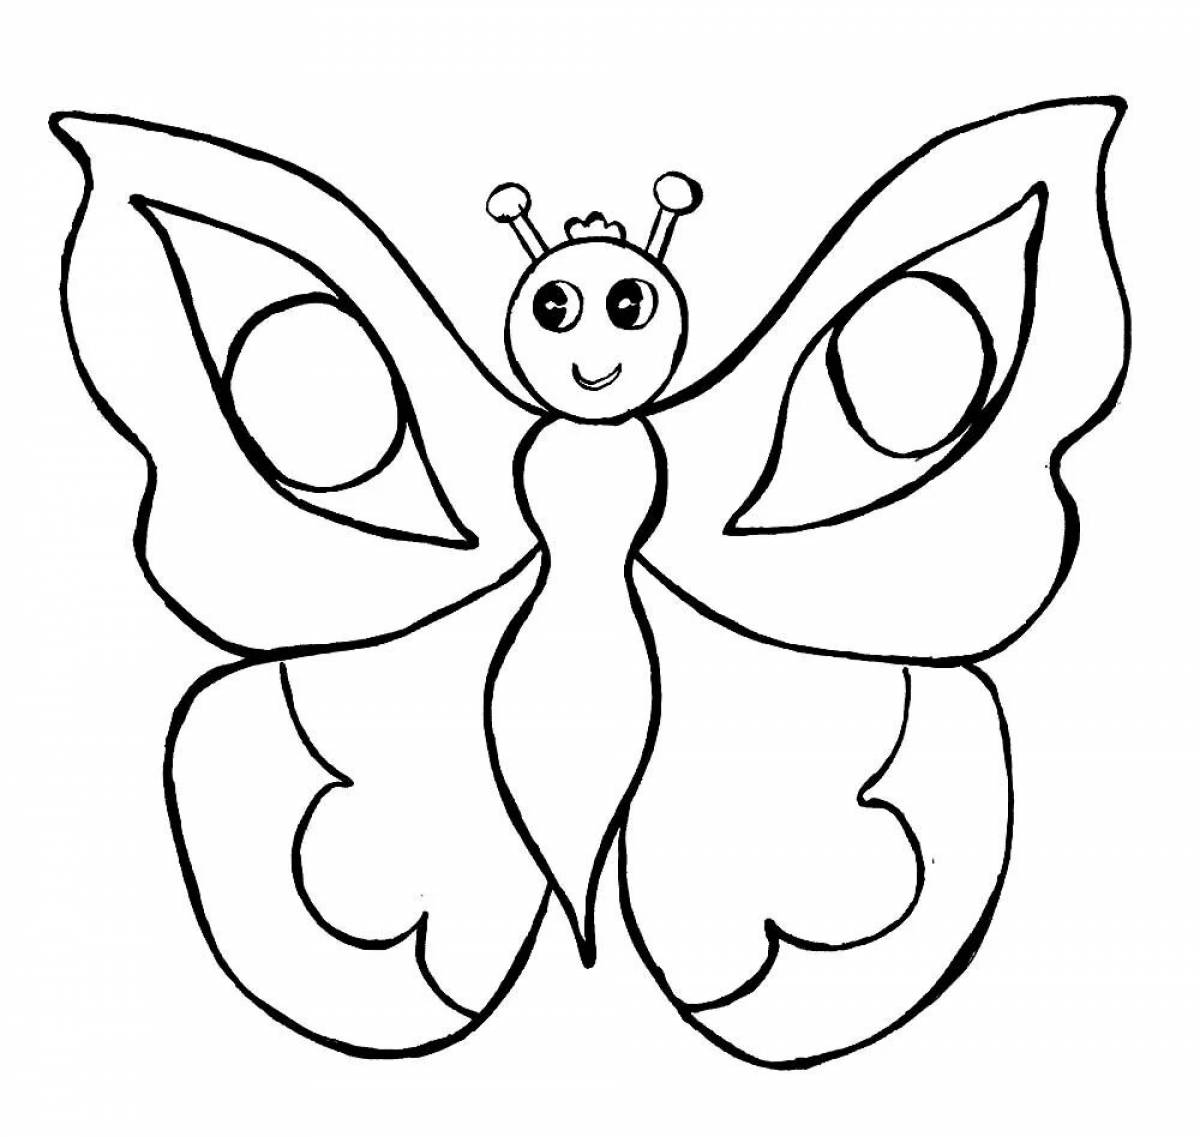 Wonderfully lit butterfly coloring page